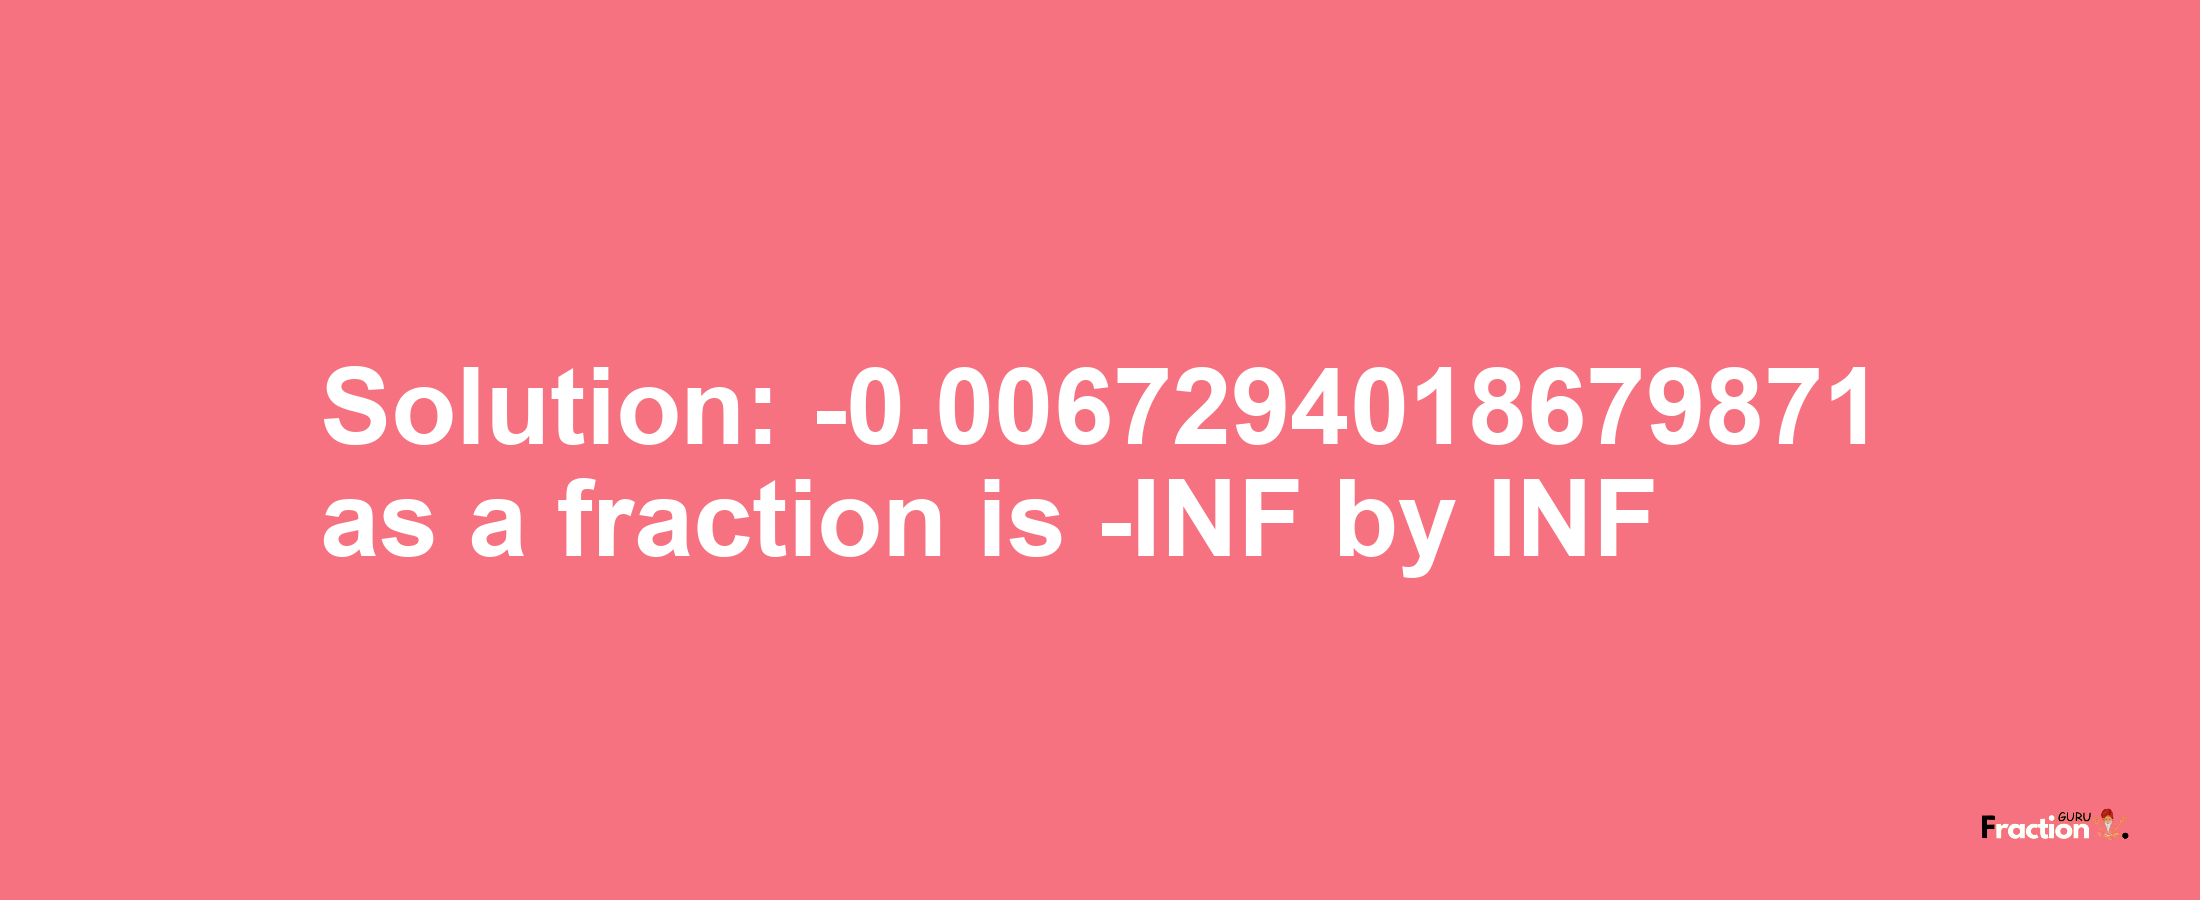 Solution:-0.0067294018679871 as a fraction is -INF/INF